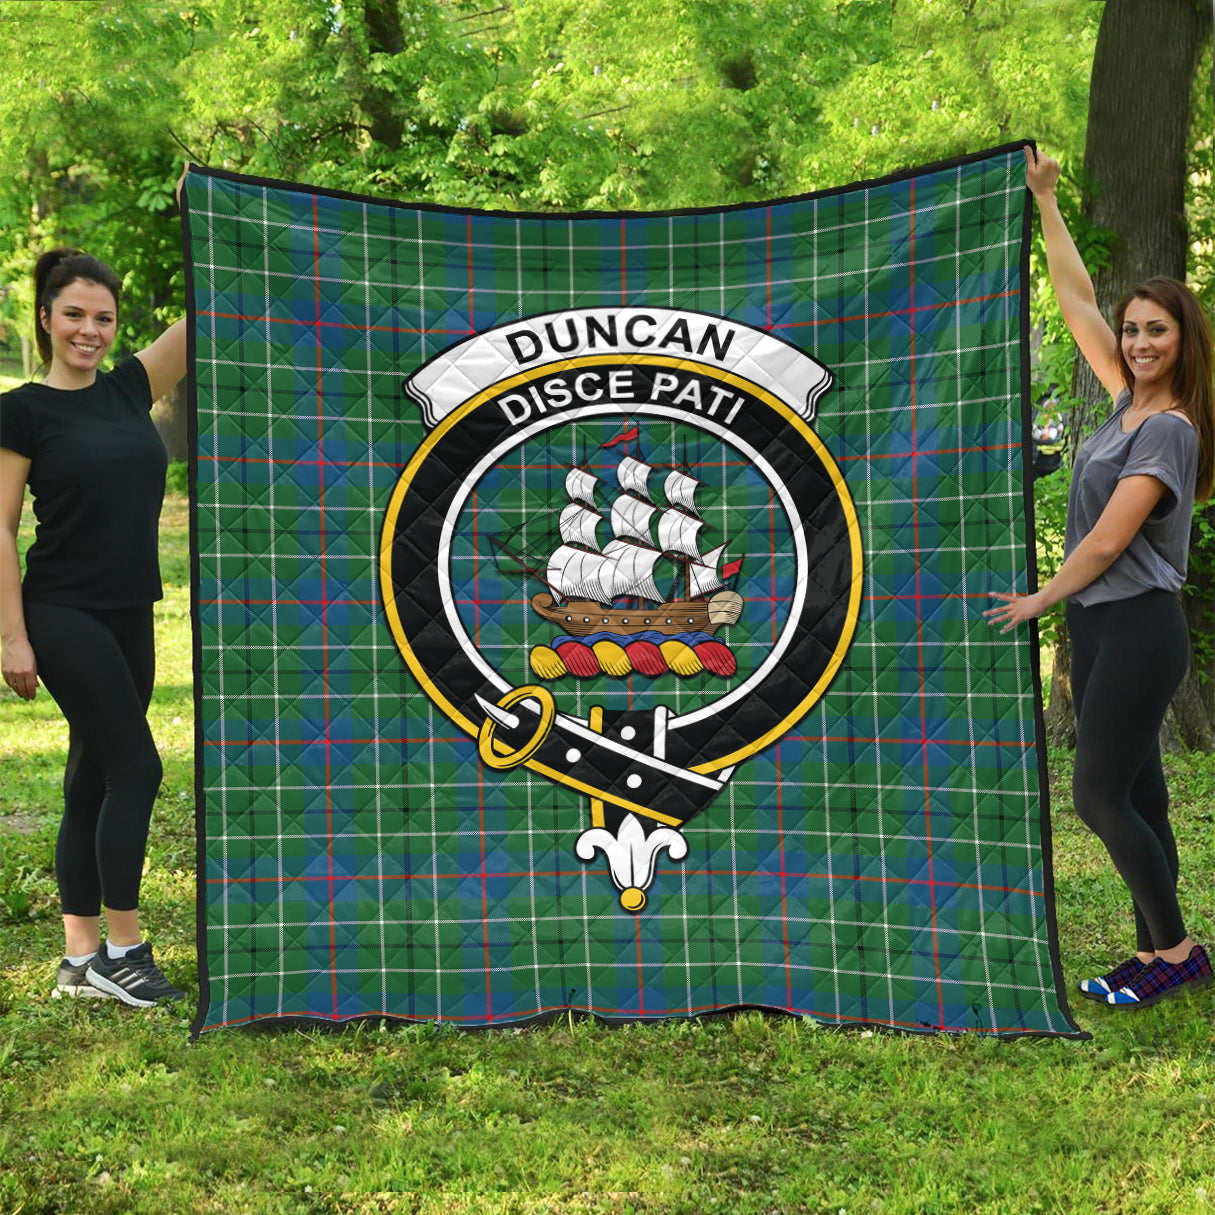 duncan-ancient-tartan-quilt-with-family-crest